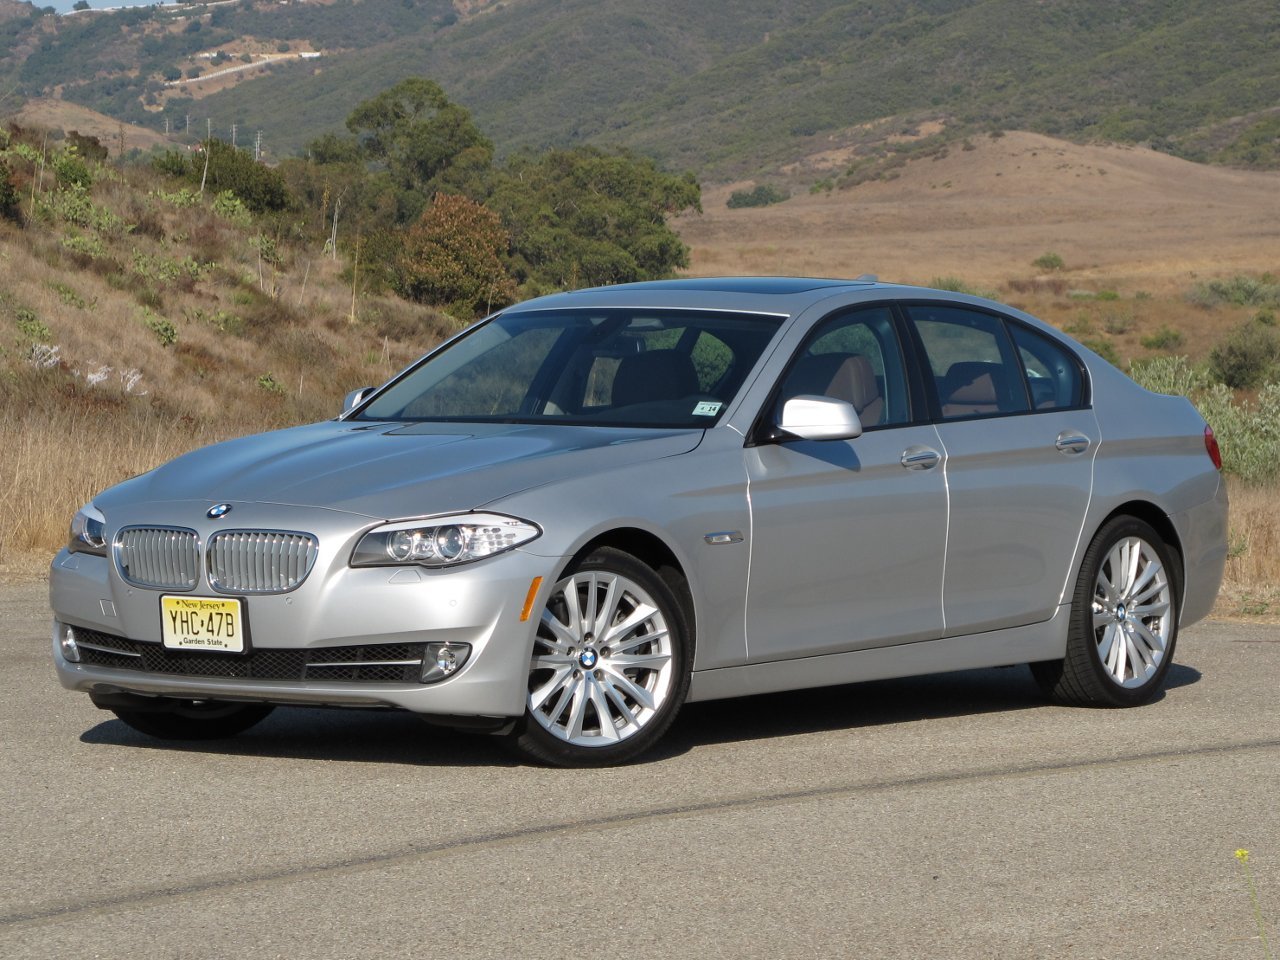 Read more: 2011 BMW 550i test drive and review